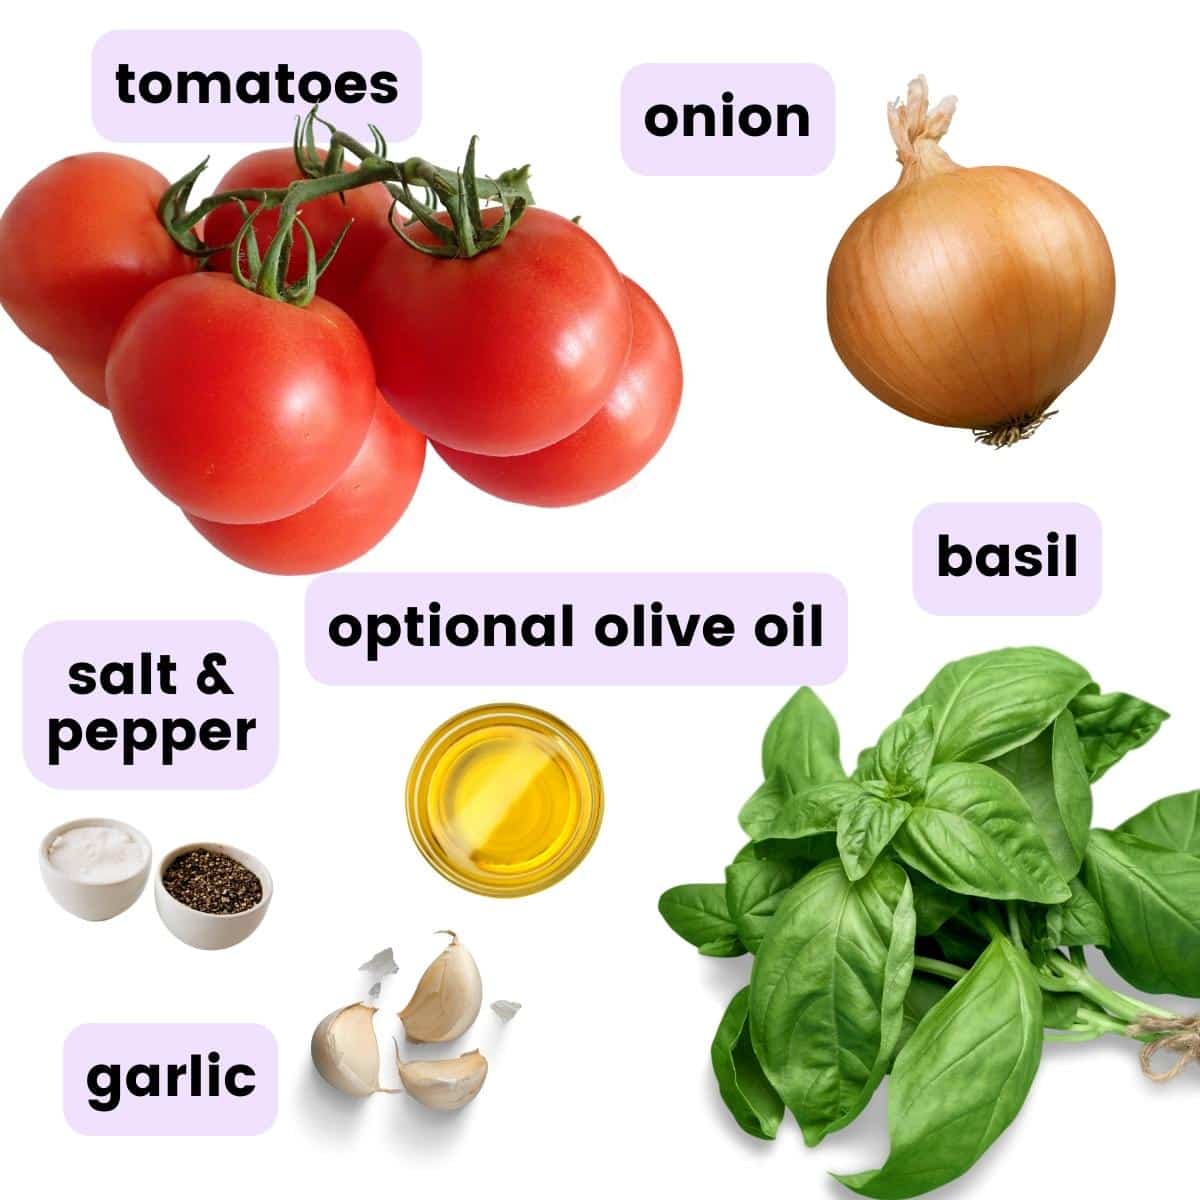 ingredients needed to make tomato basil soup